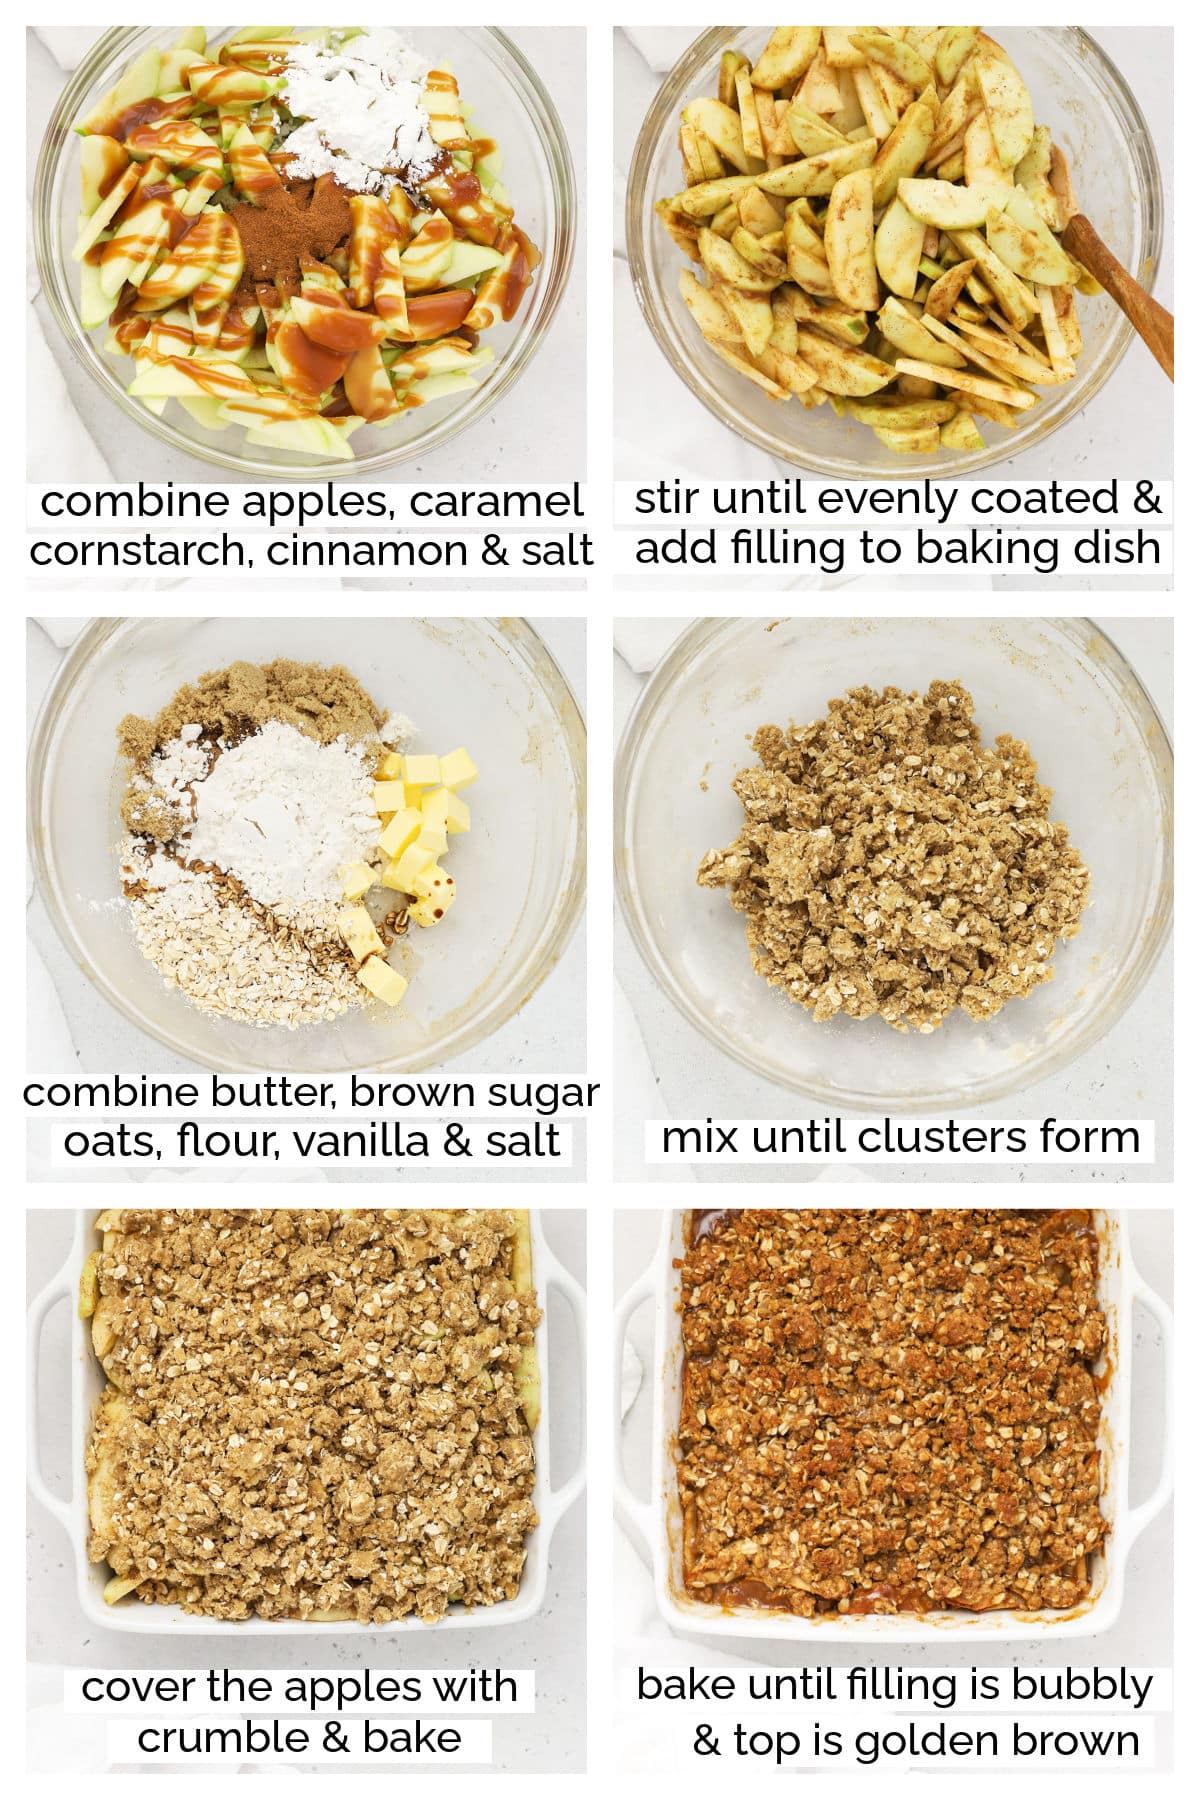 making gluten-free apple crisp with caramel sauce step by step